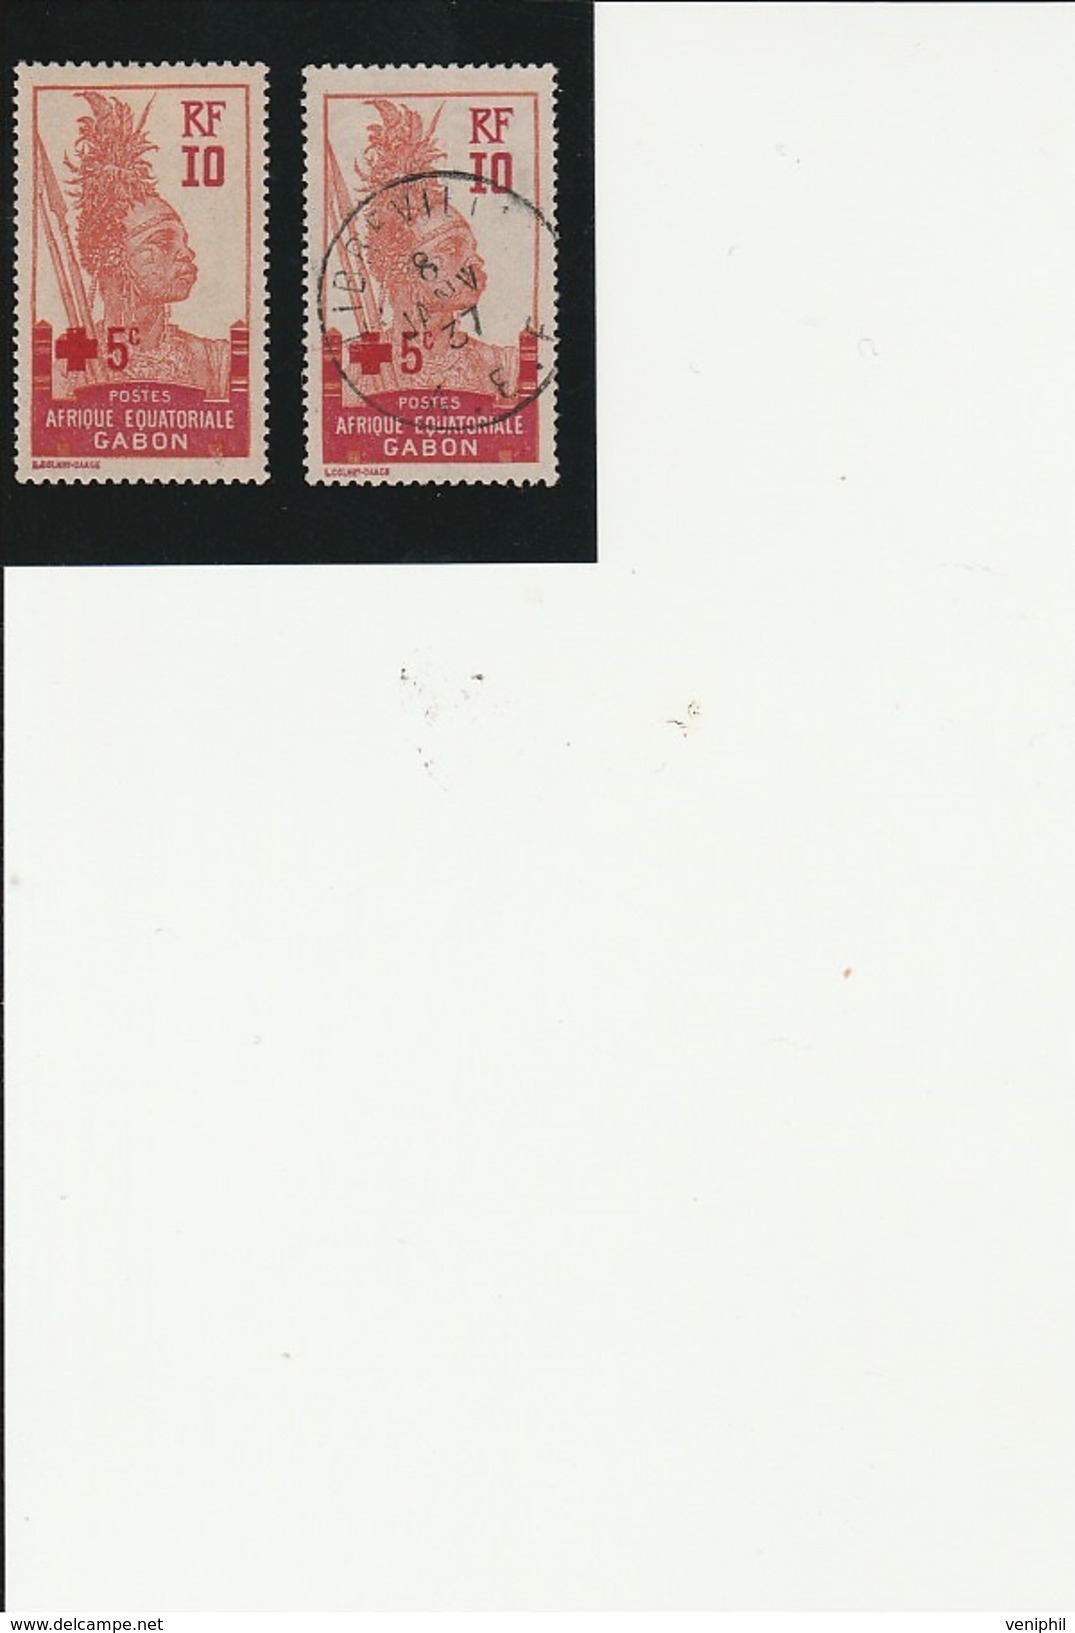 GABON - CROIX ROUGE - N° 81 NEUF X  + 1 EXEMPLAIRE OBLITERE  ANNEE 1915-17 - Unused Stamps